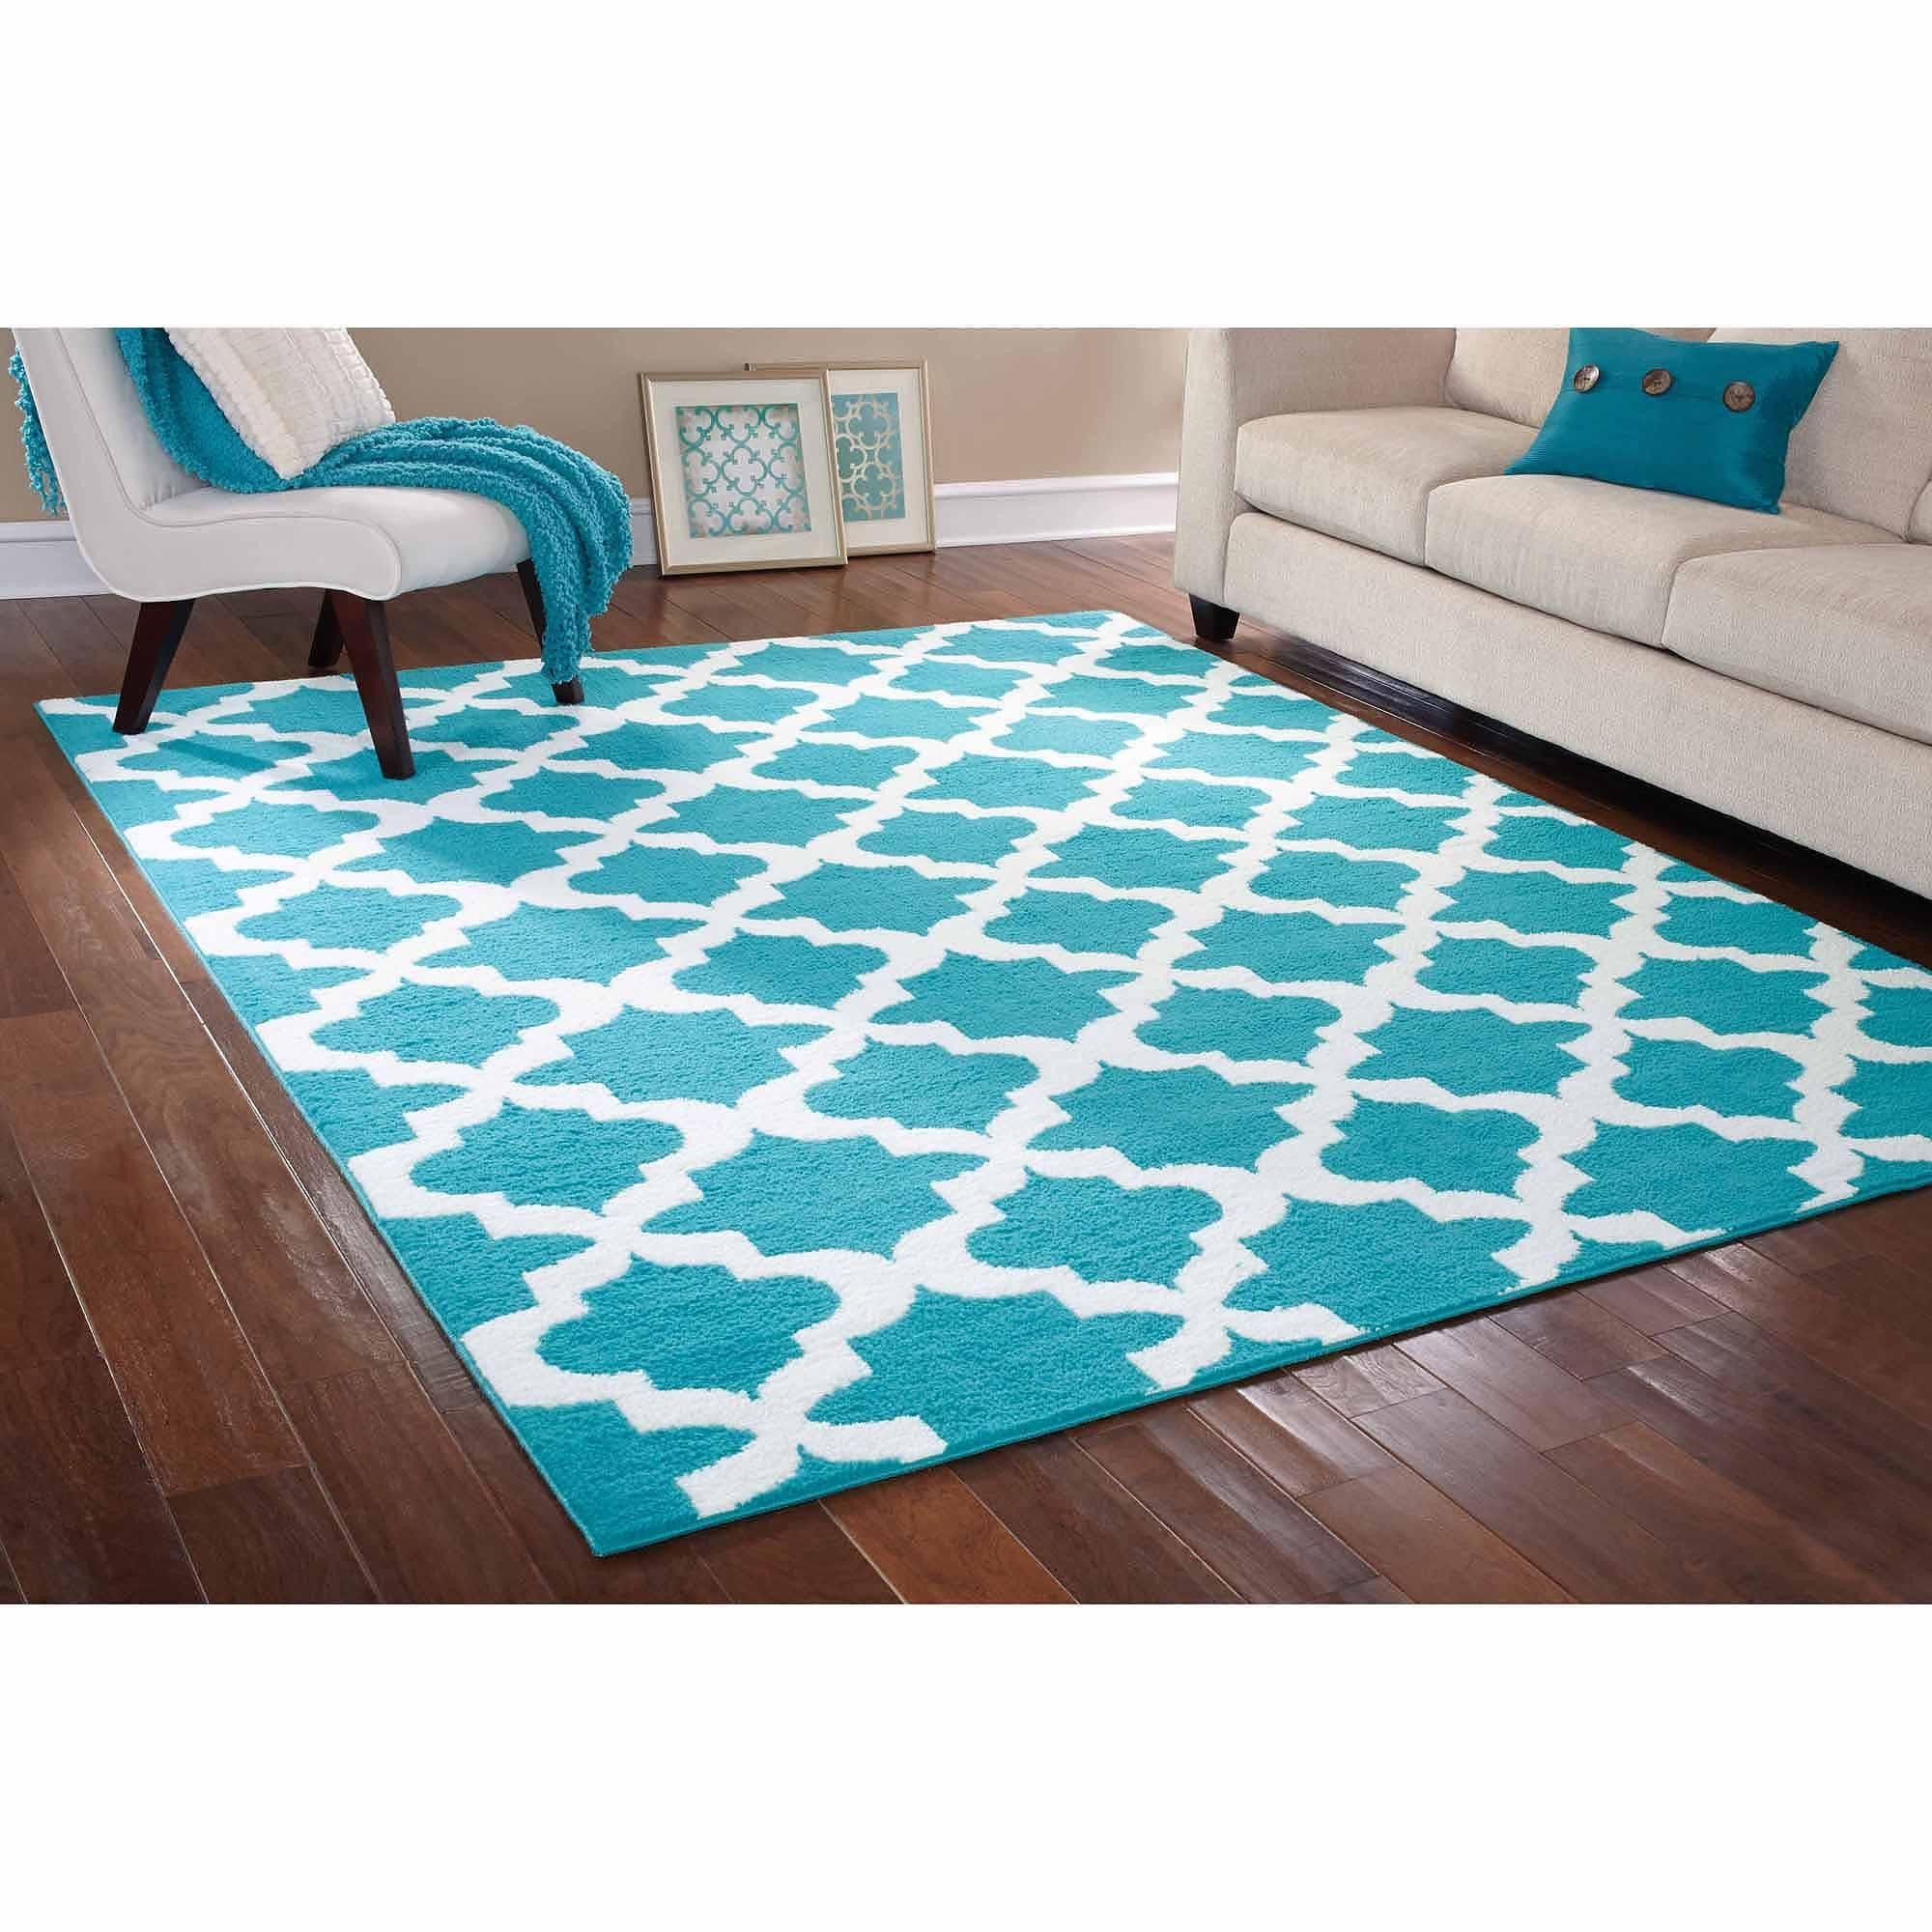 Walmart Living Room Rugs
 Interior Cool Decoration Walmart Carpets For Appealing